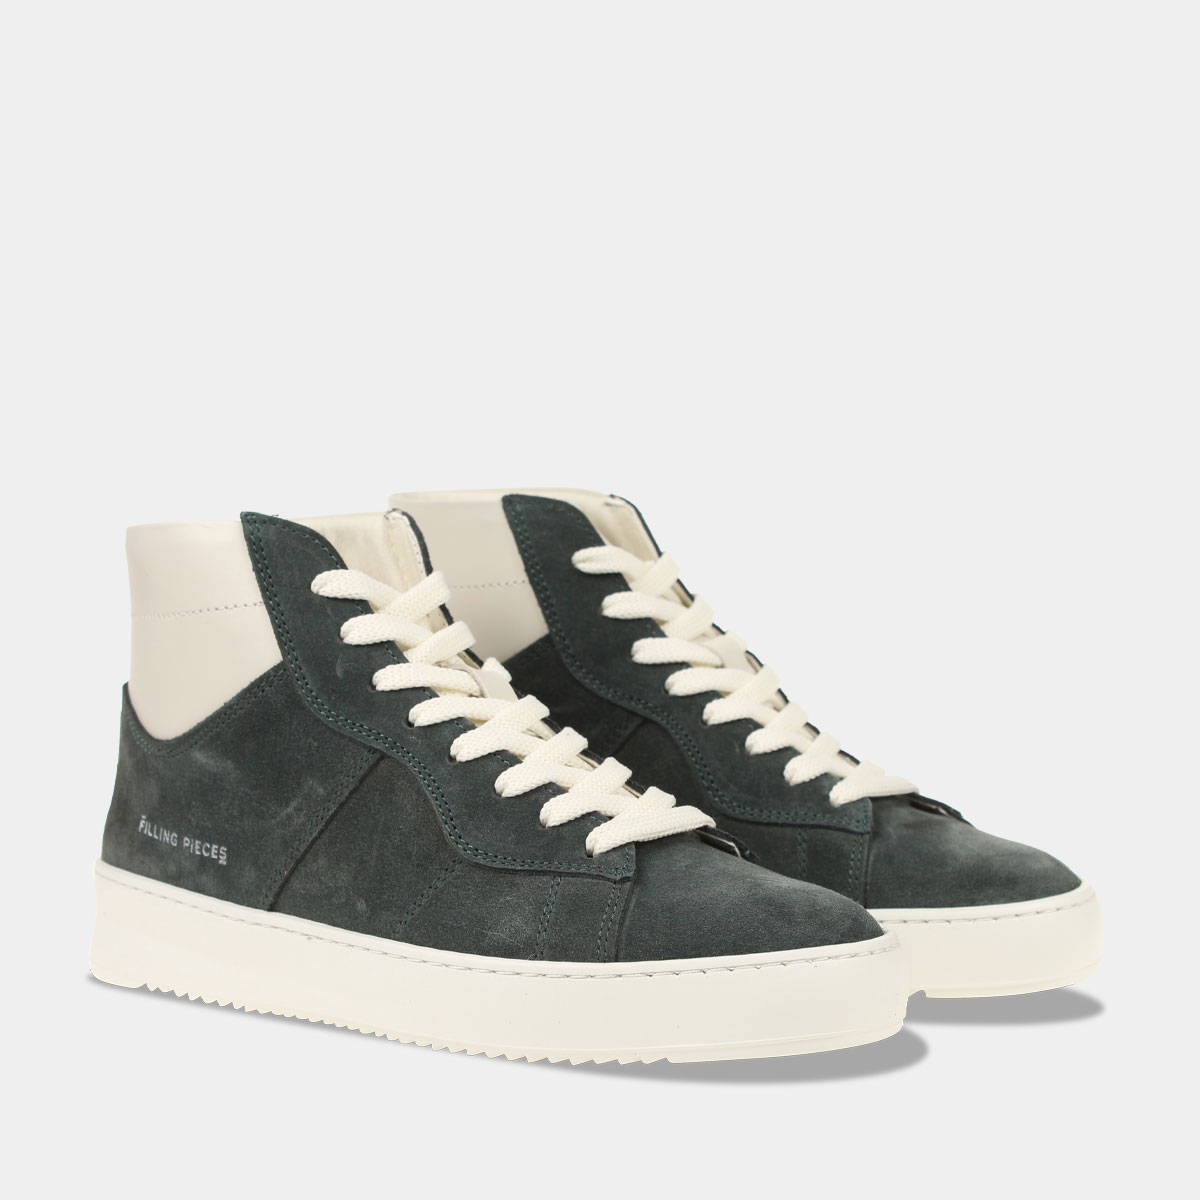 Filling Pieces Mid Court Mix Groen